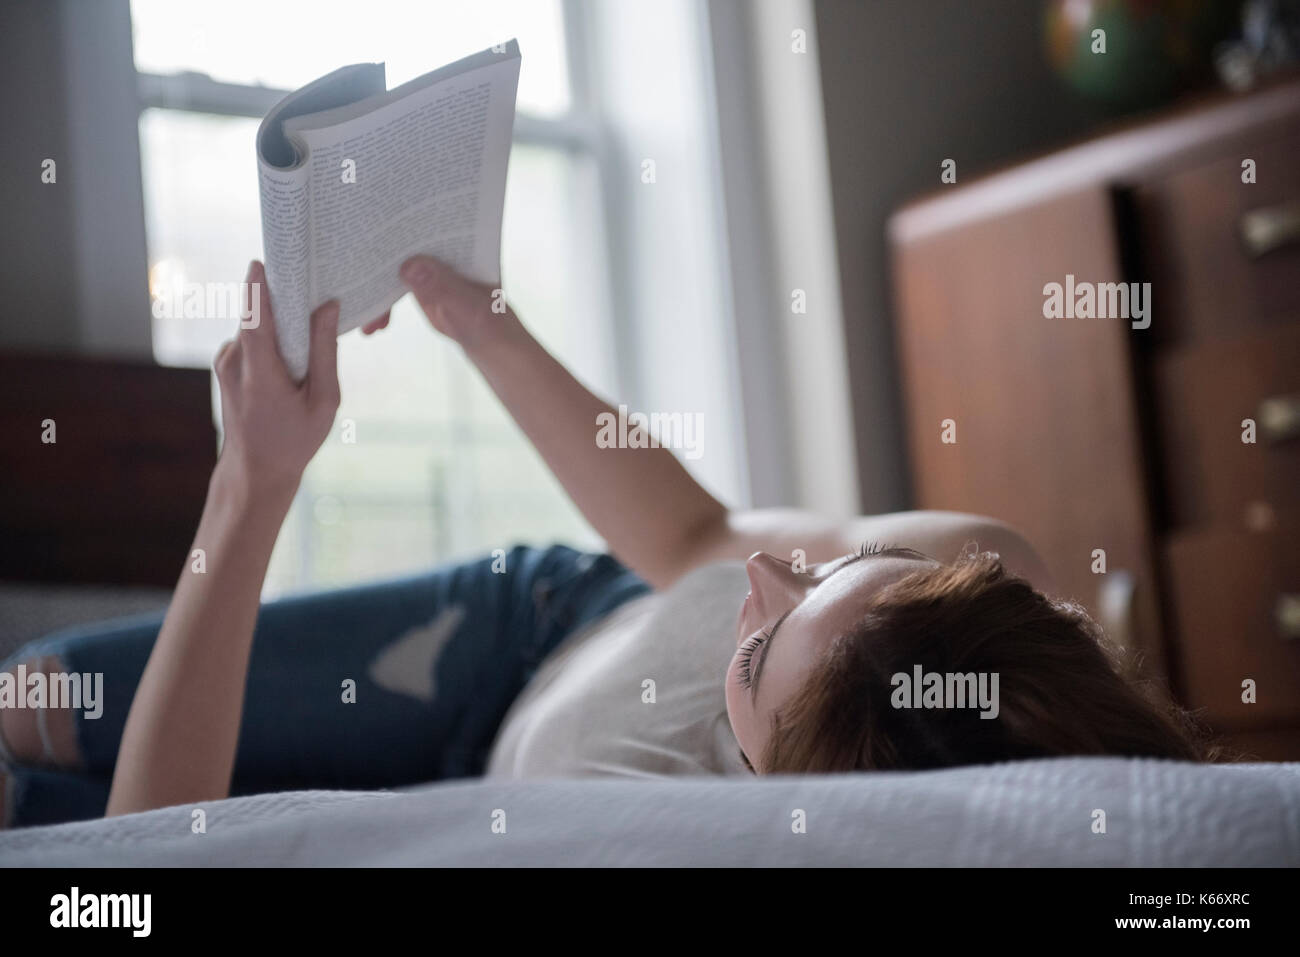 Caucasian woman laying on bed reading book Stock Photo